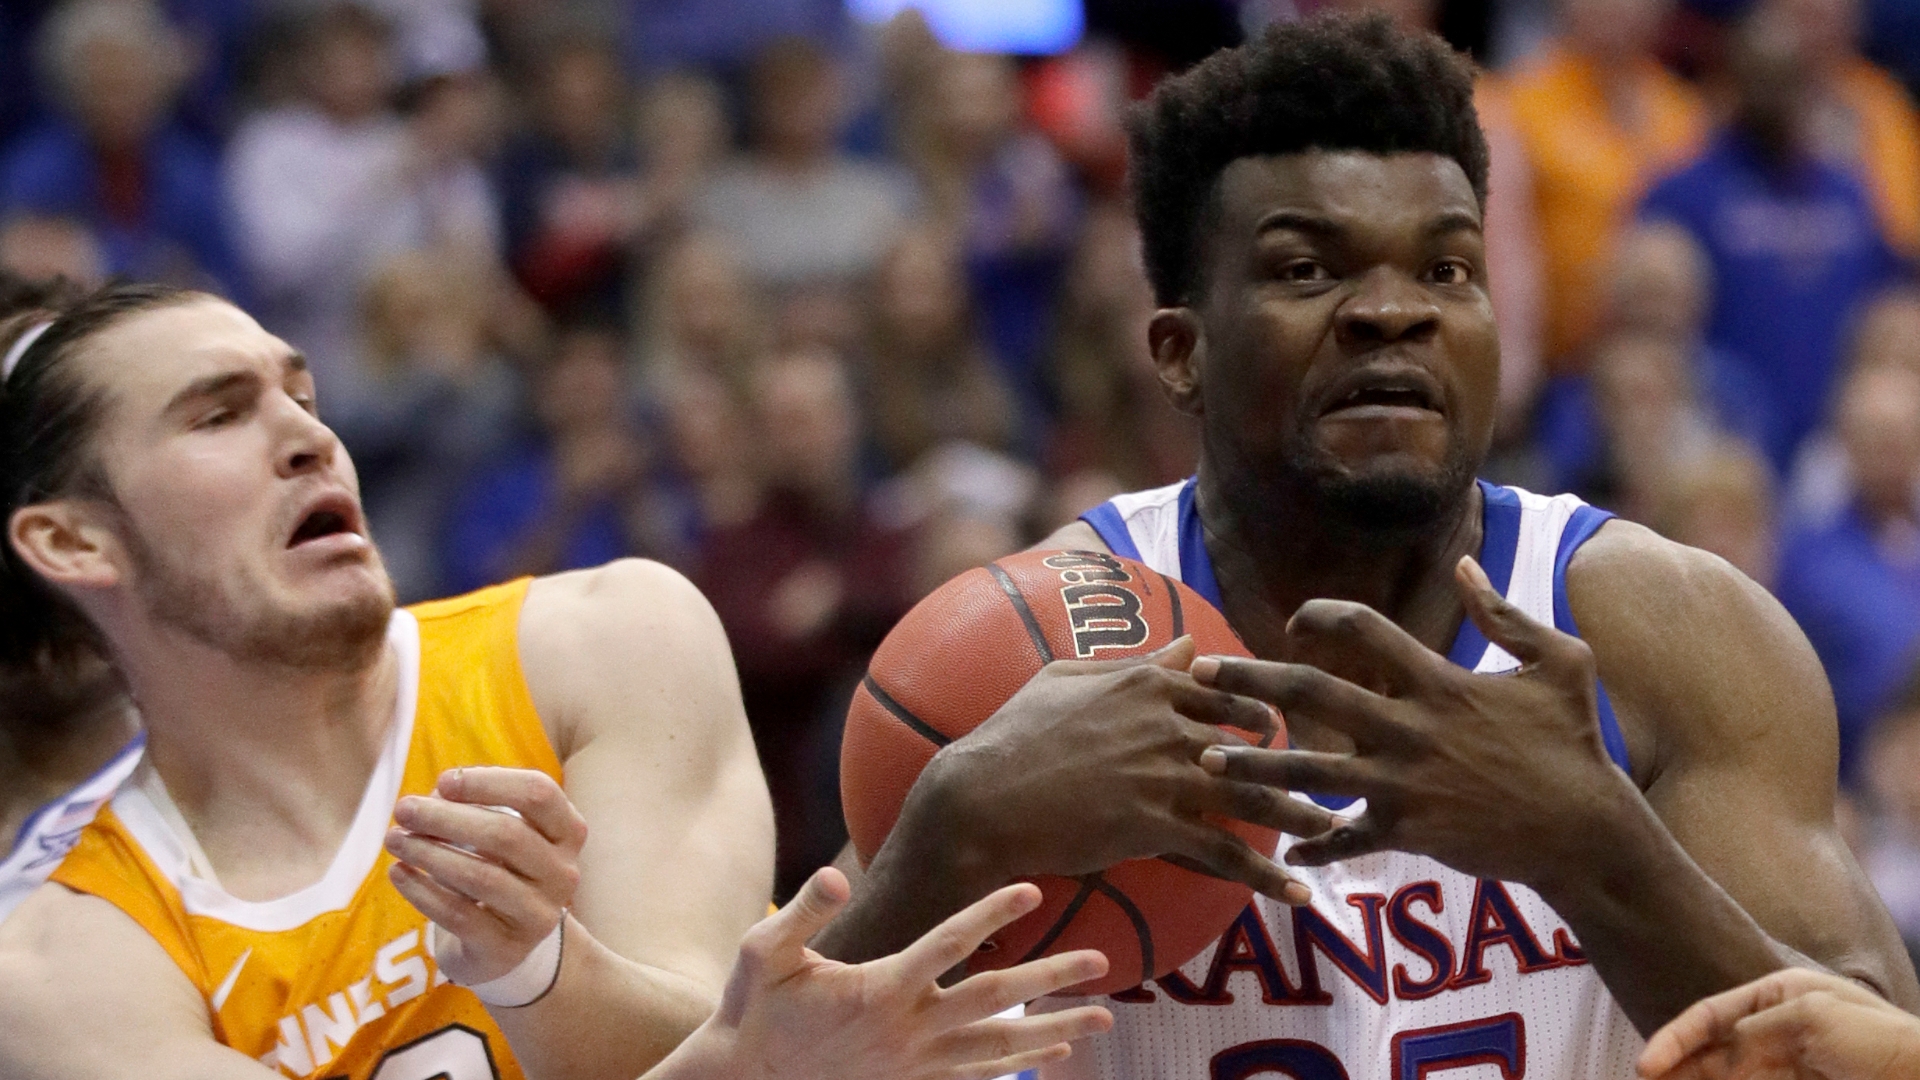 Kansas survives late scare from Tennessee